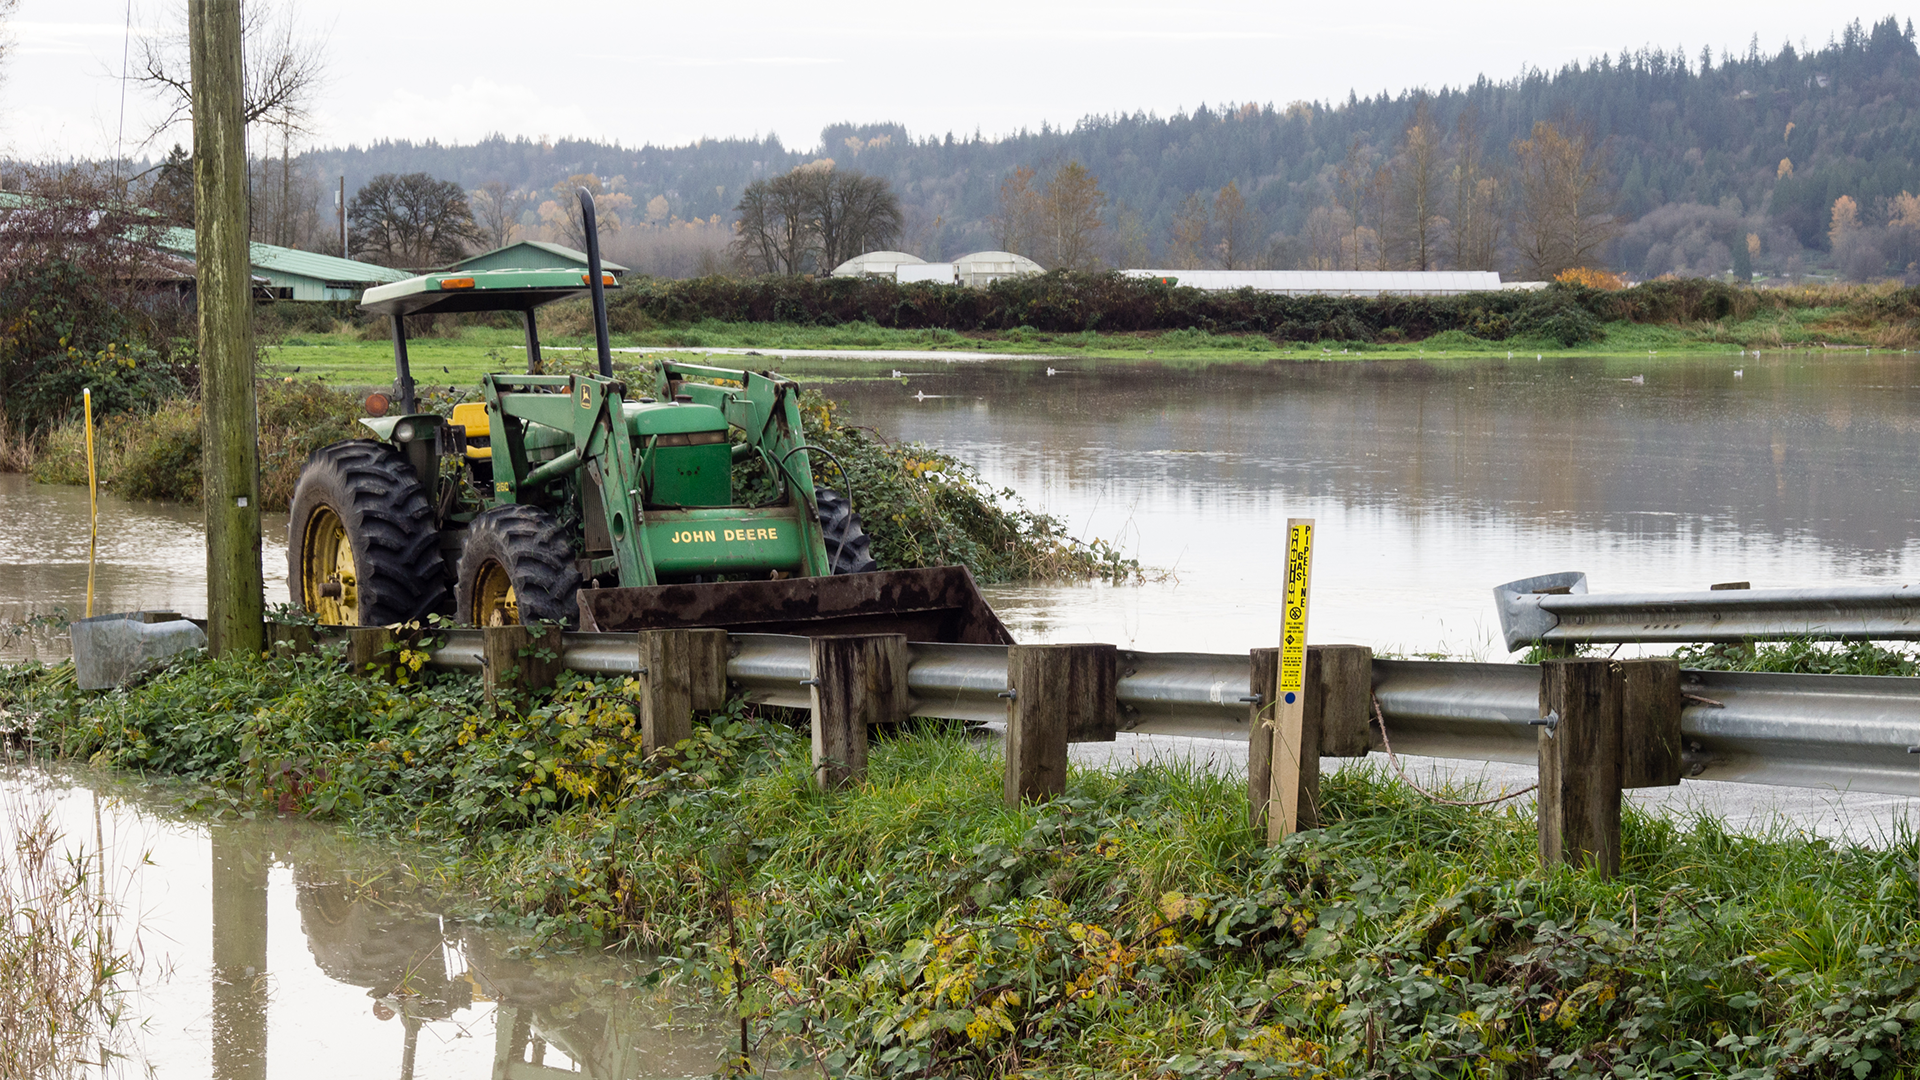 Farming tractor on a flooded road in Washington state.